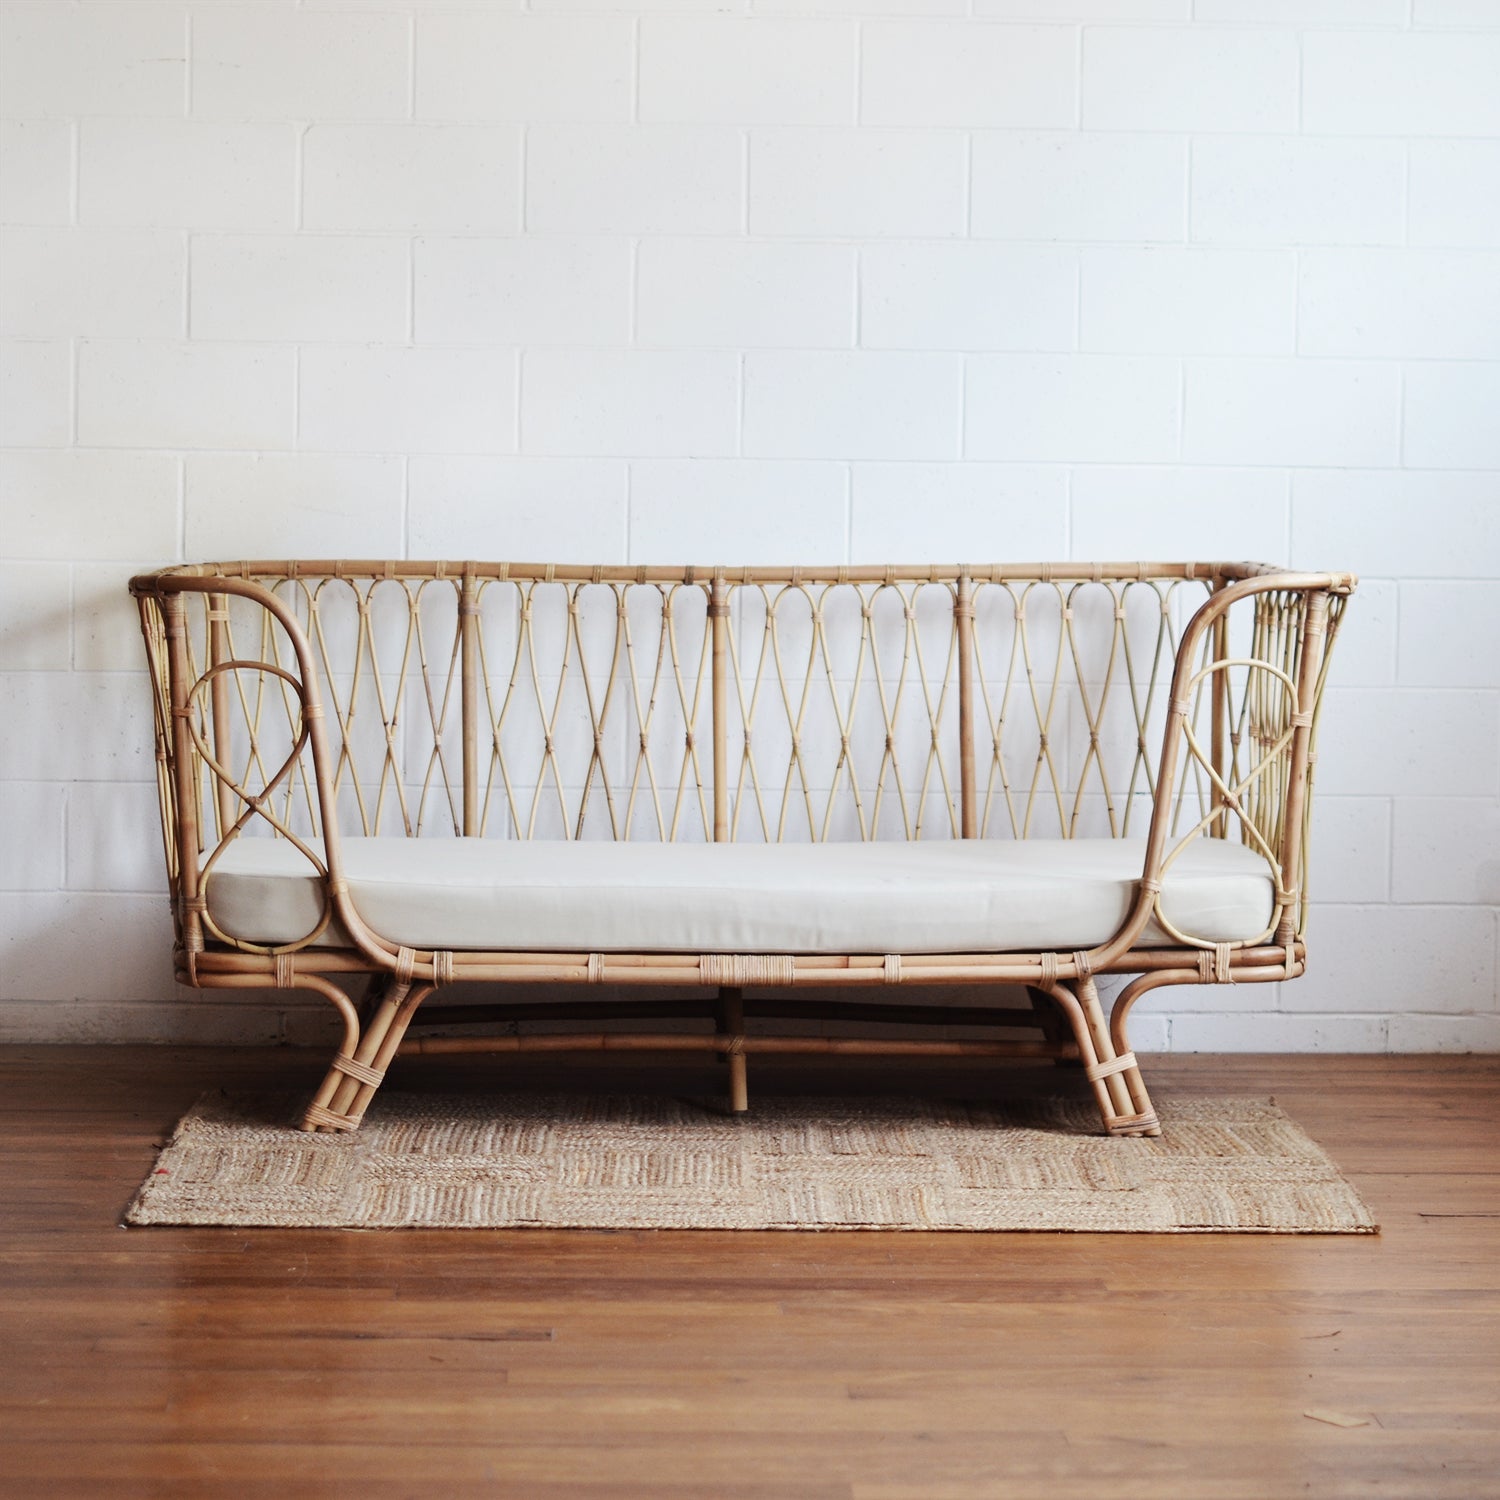 PREORDER - Hinterland Natural Rattan Daybed